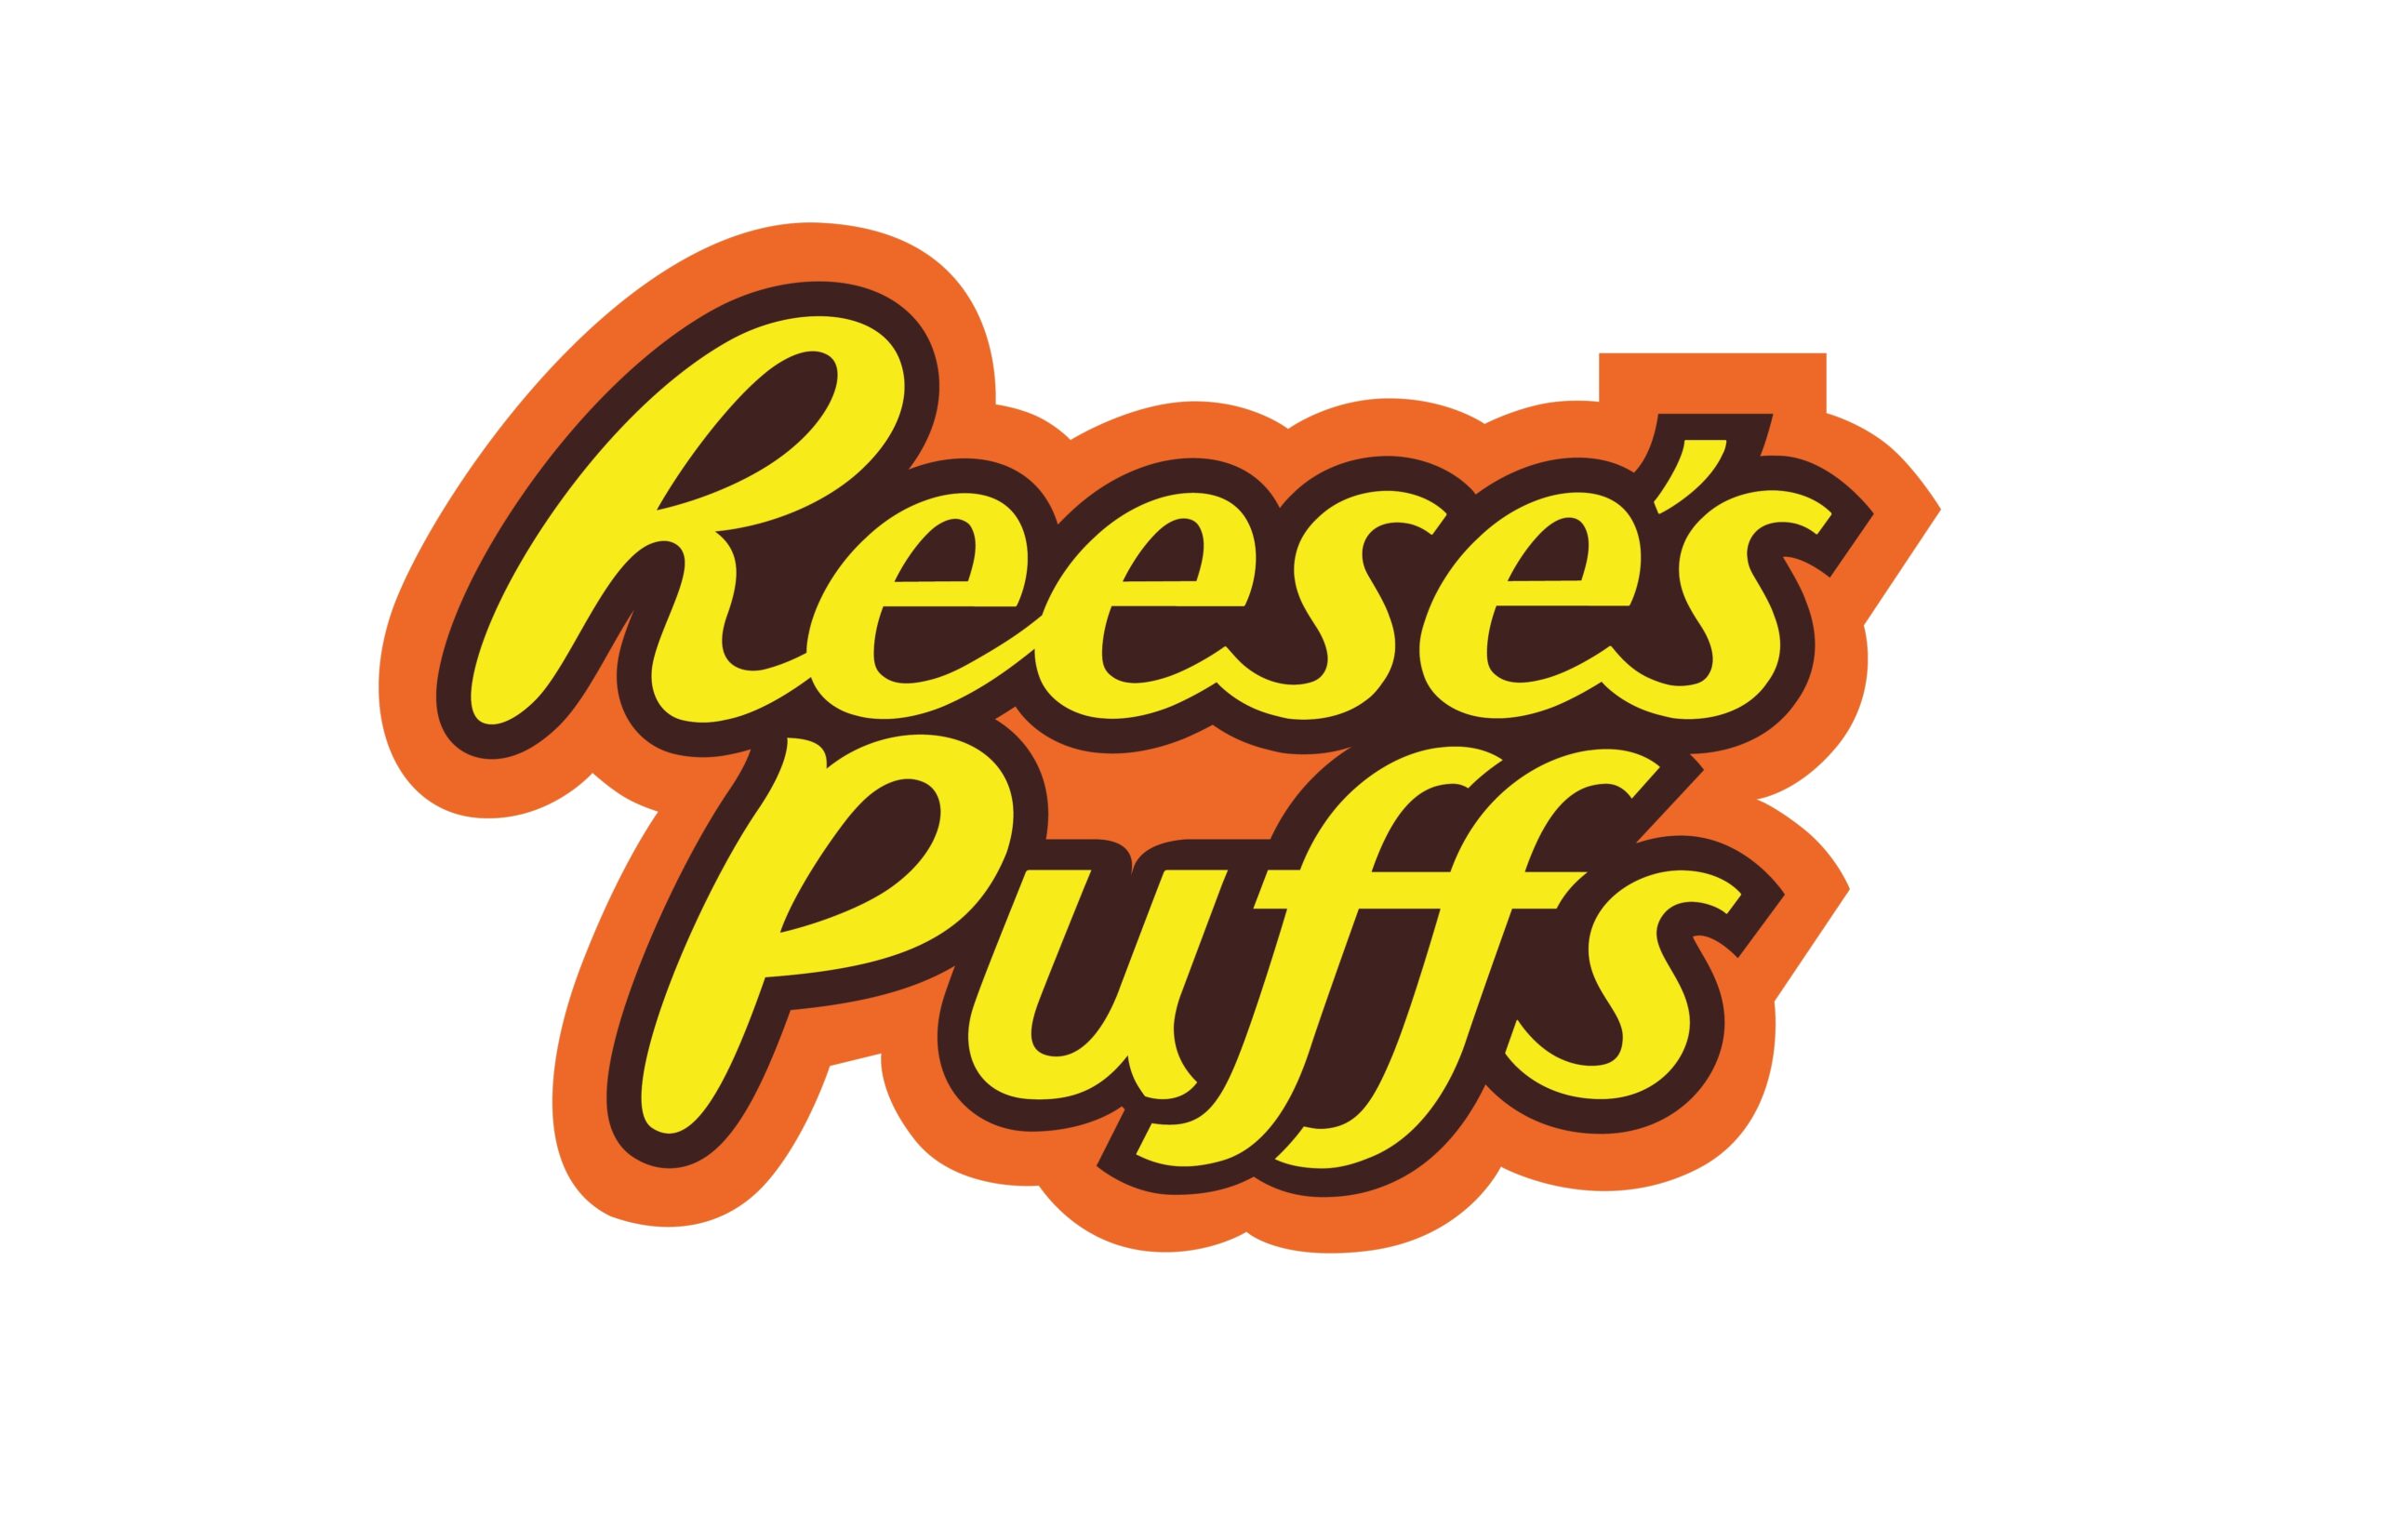 is reese puffs cereal halal in the United States?